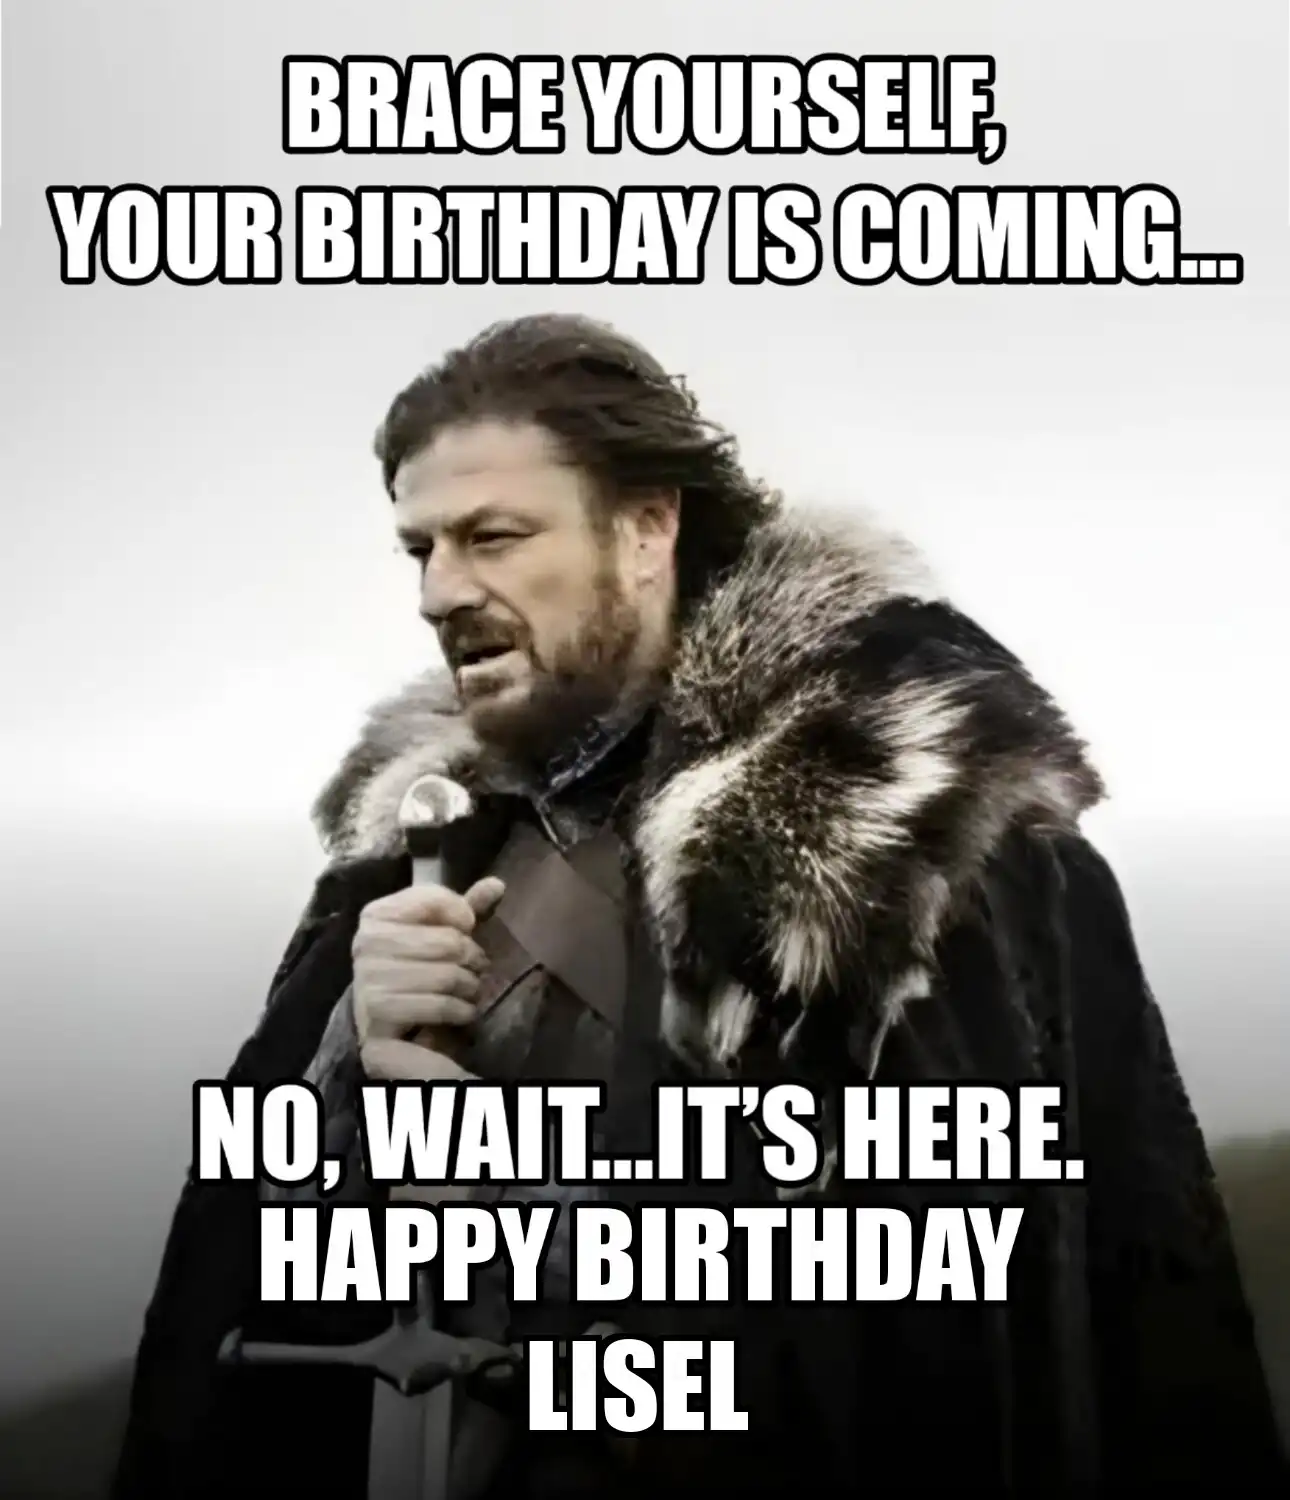 Happy Birthday Lisel Brace Yourself Your Birthday Is Coming Meme